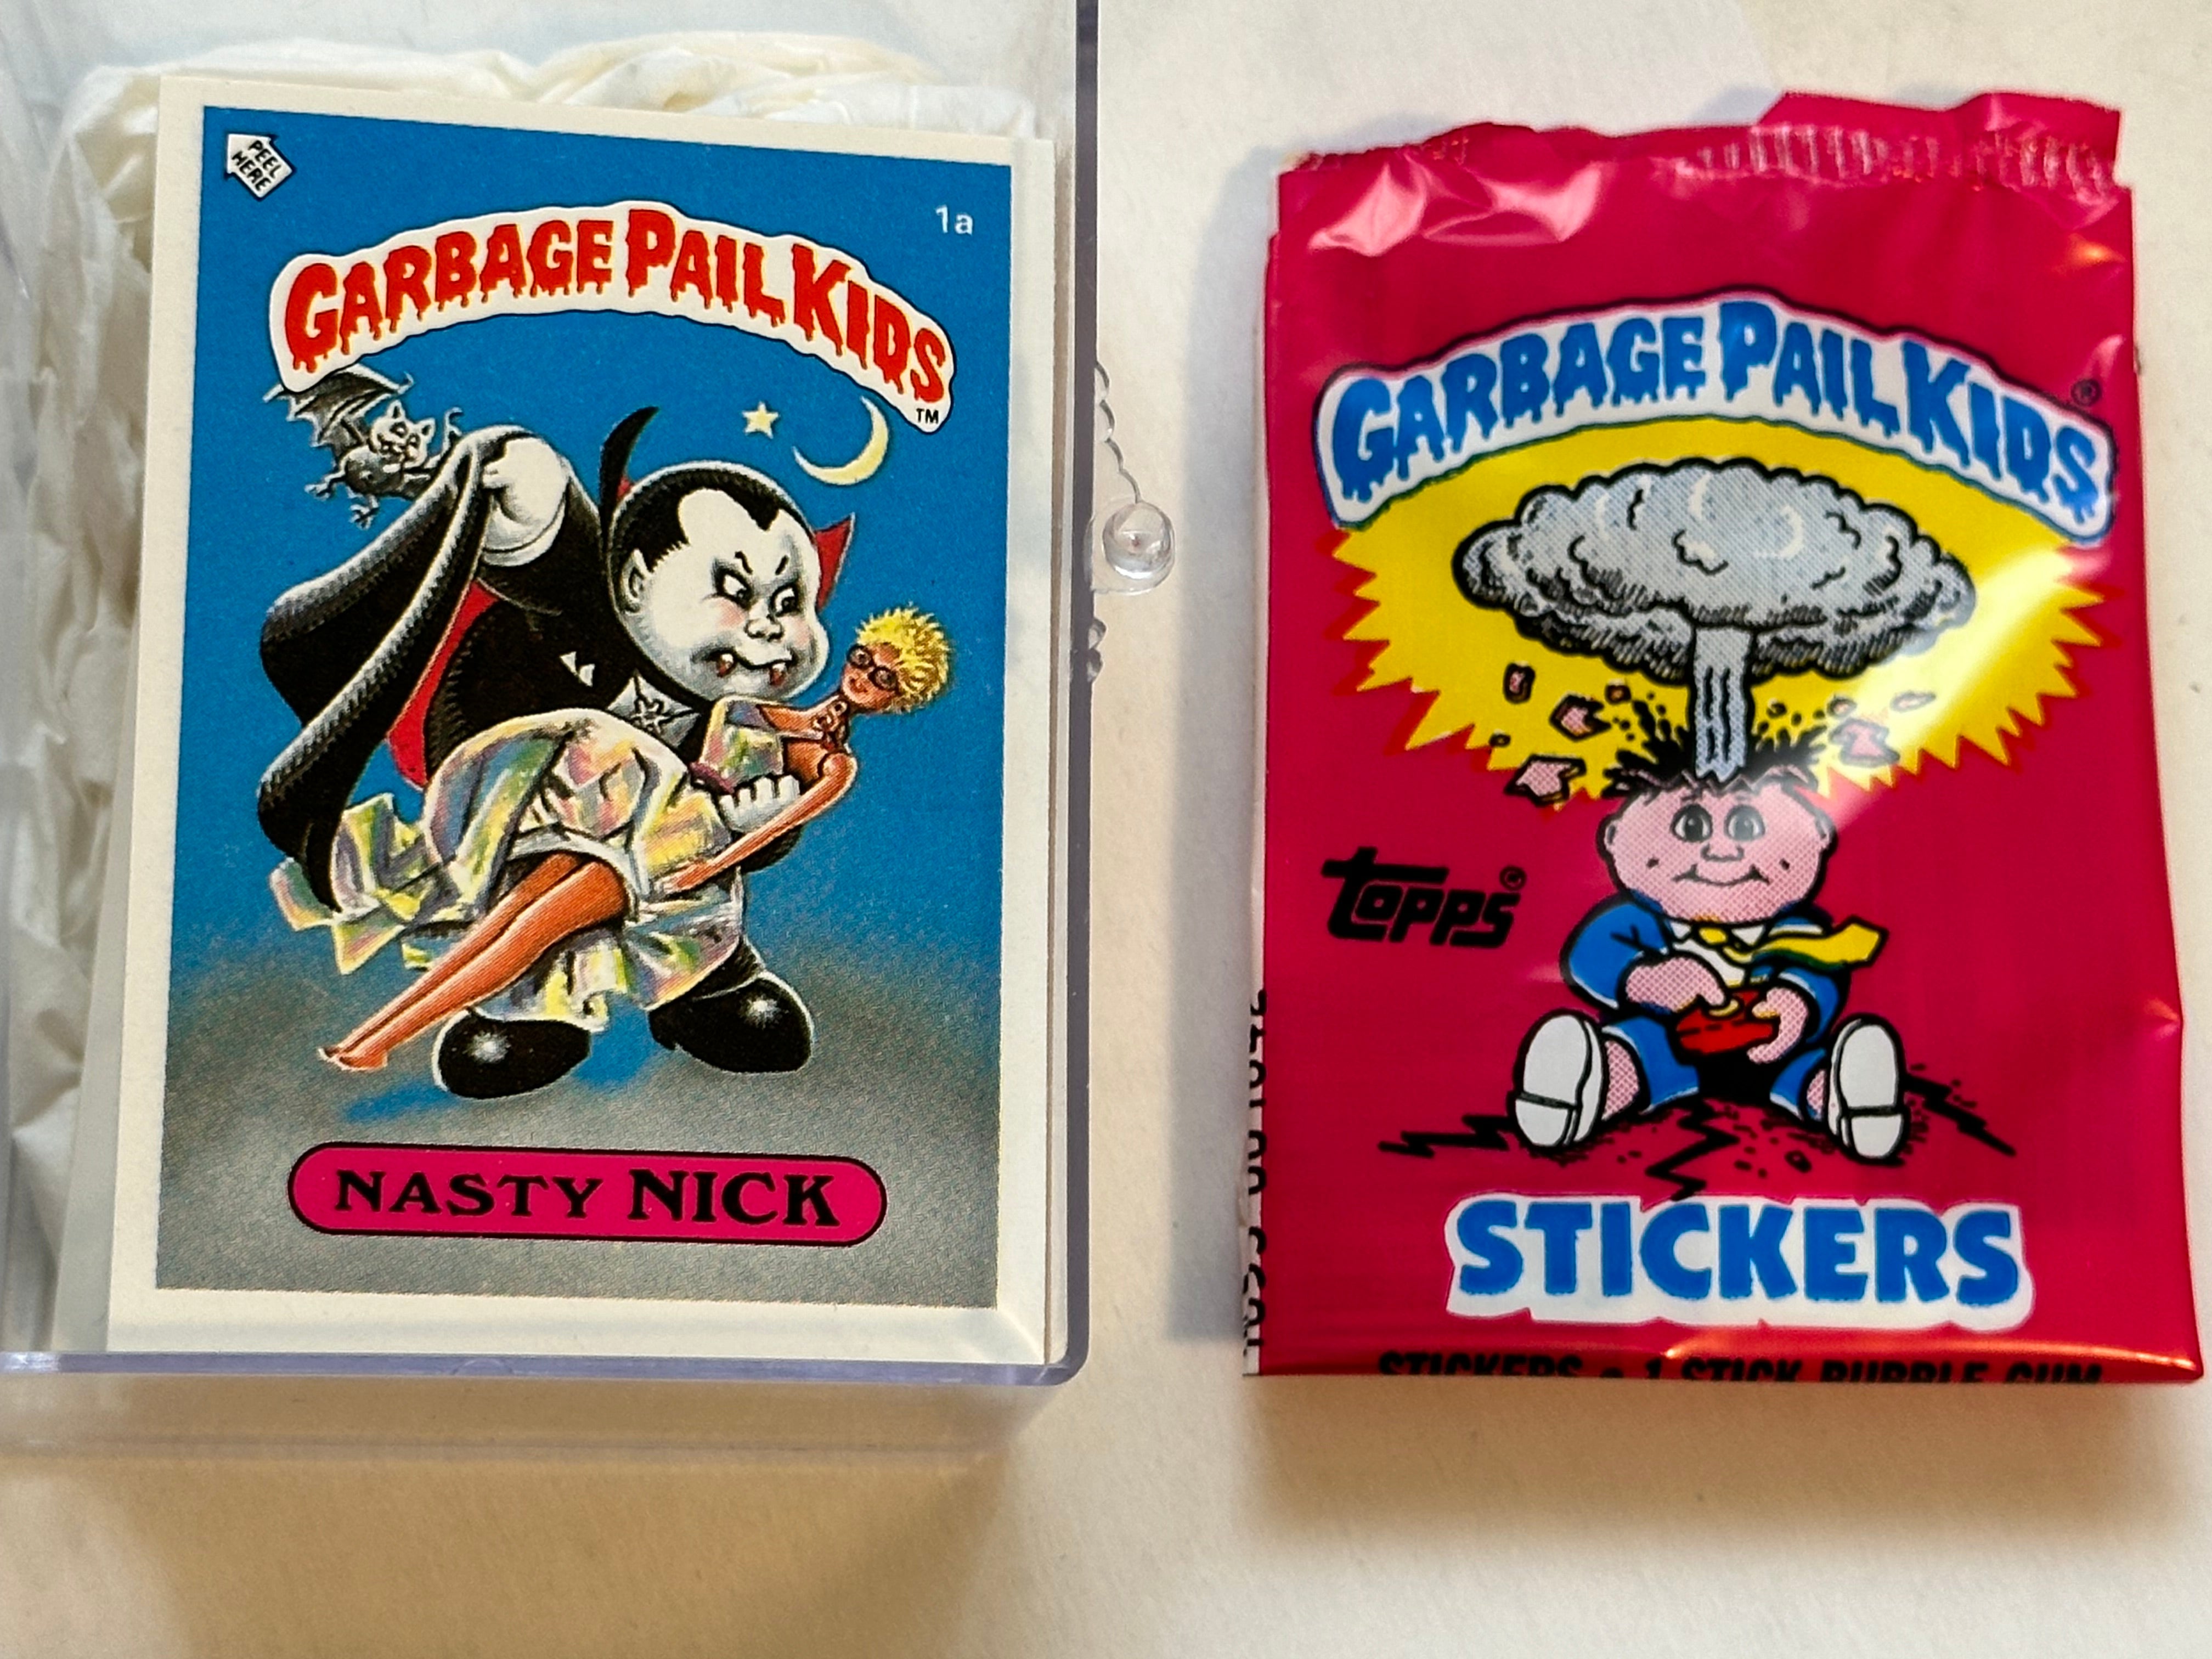 Garbage Pail Kids series 1 rare UK high grade condition set with wrapper 1985